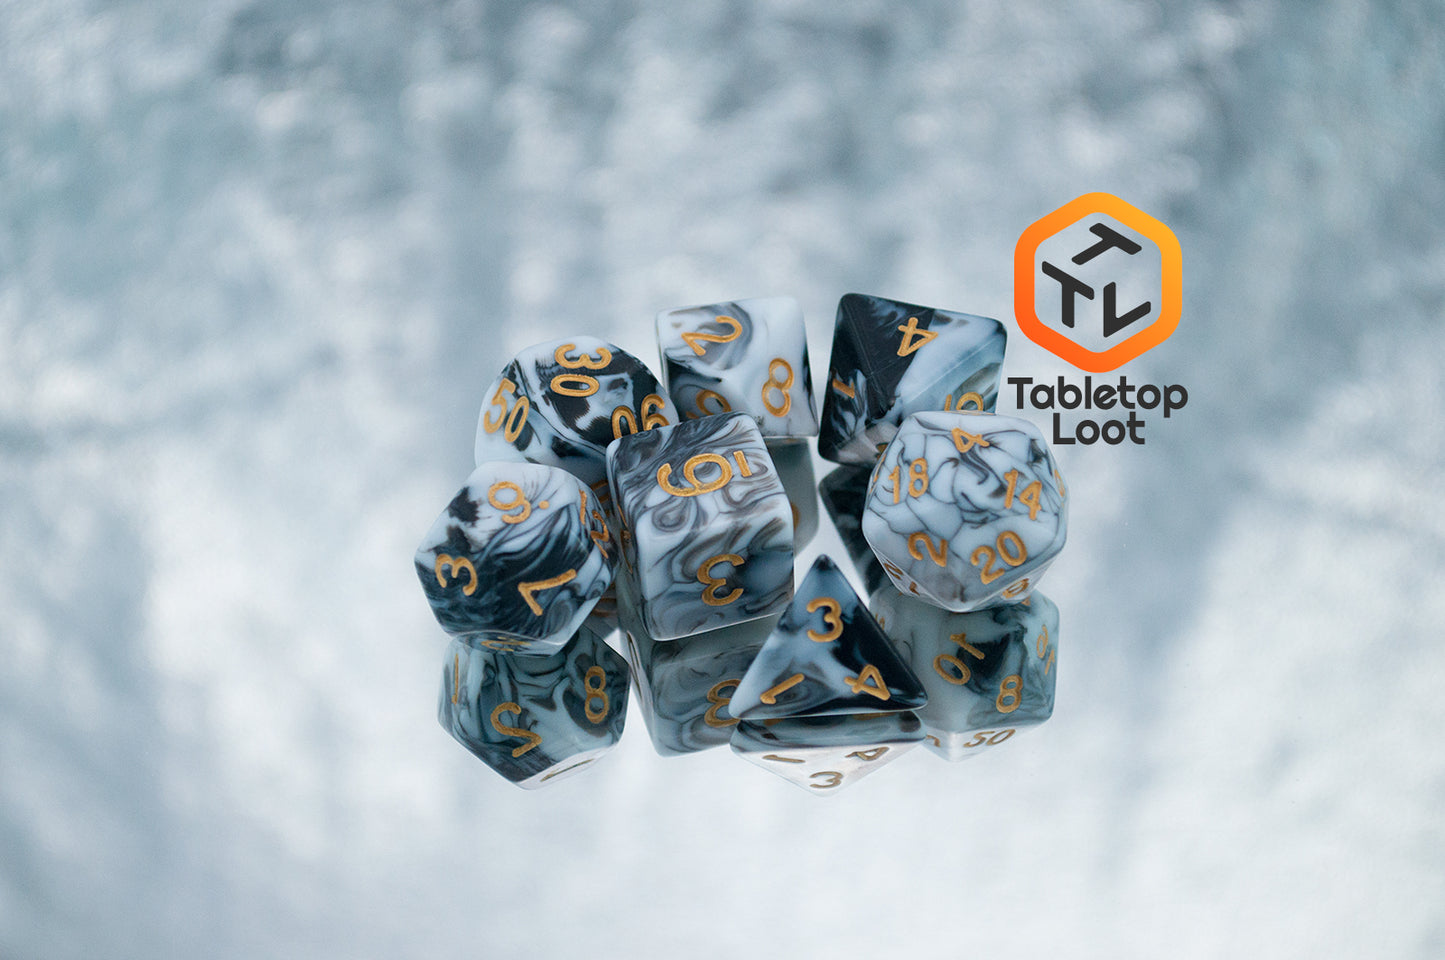 The Rolling Thunder 7 piece dice set from Tabletop Loot with swirls of white, grey, and black resin and gold numbering.